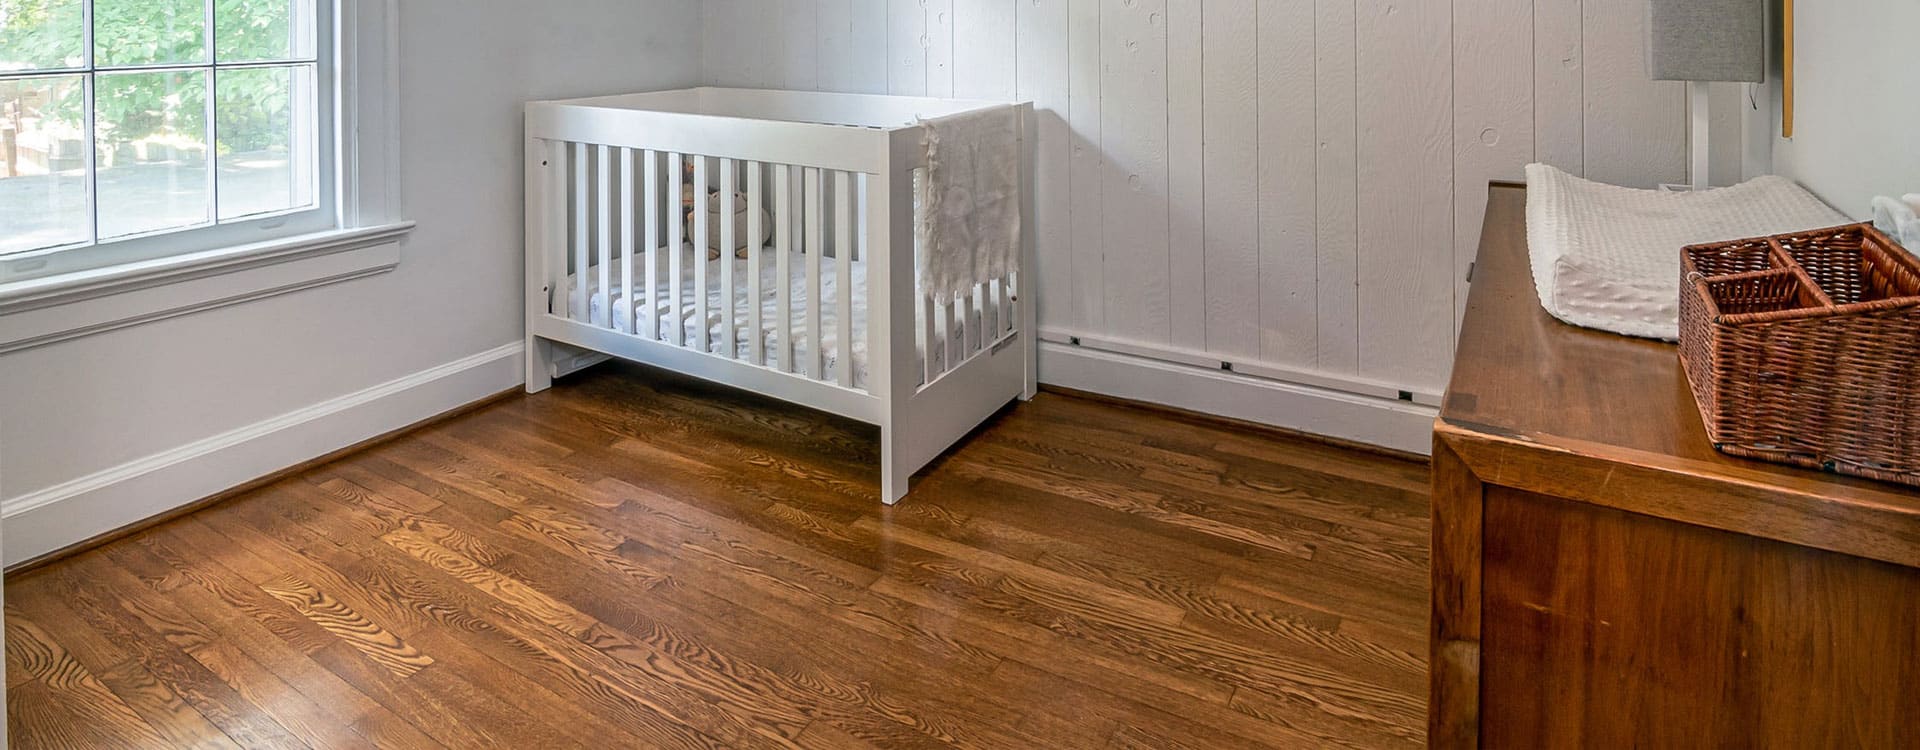 Flooring For Children's Room: Top Tips and Advice - Flooring Experts in Brisbane, QLD